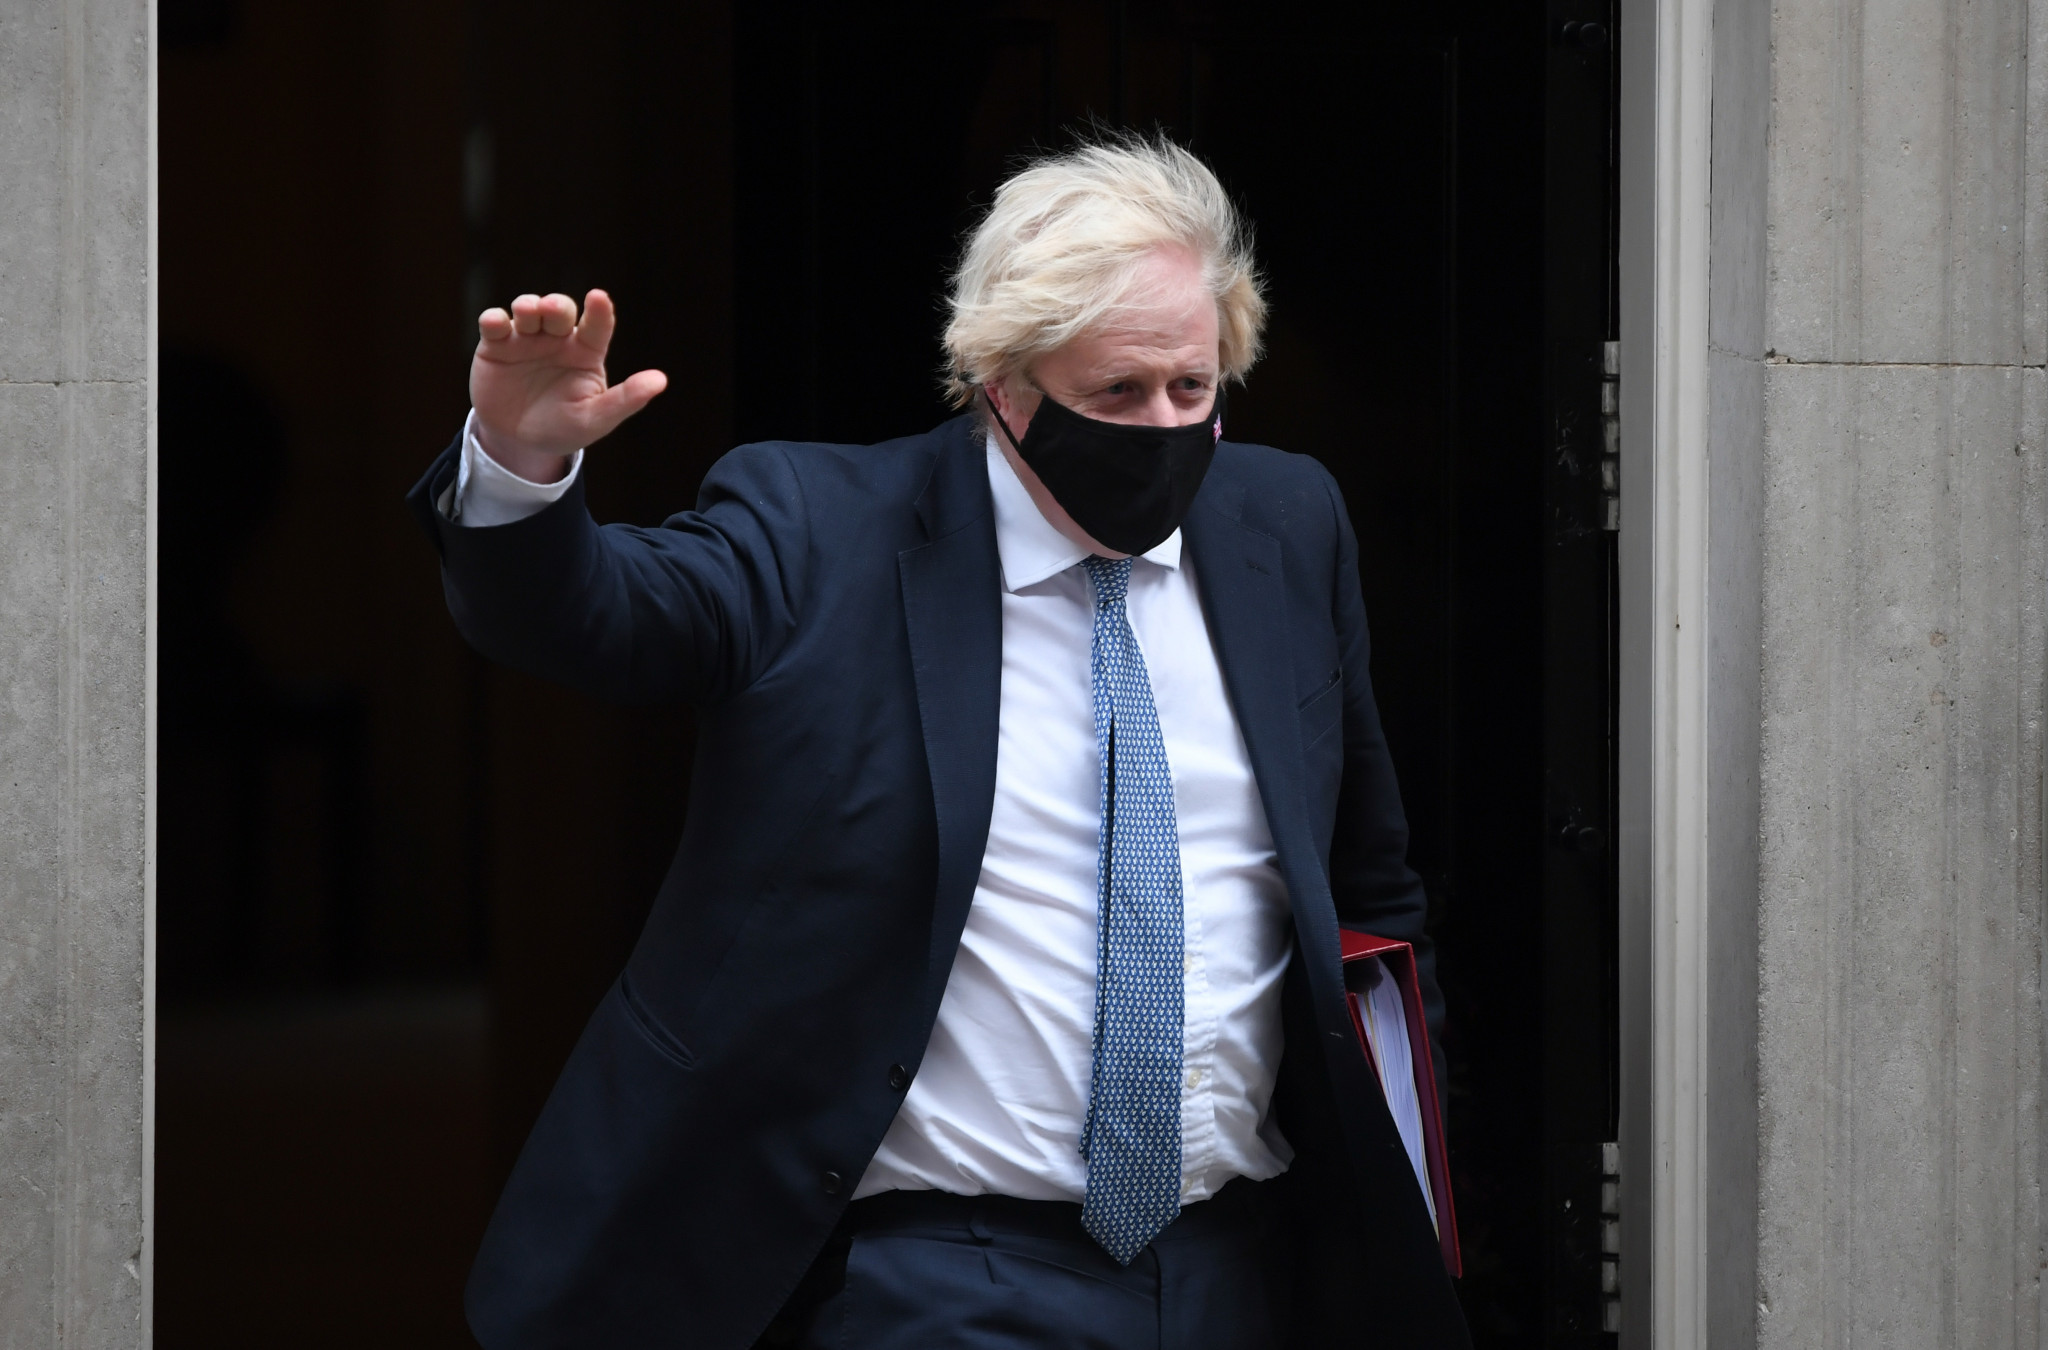 Boris Johnson, arriving at Prime Minister's Questions, announced Britain would not send Government officials to Beijing 2022 ©Getty Images